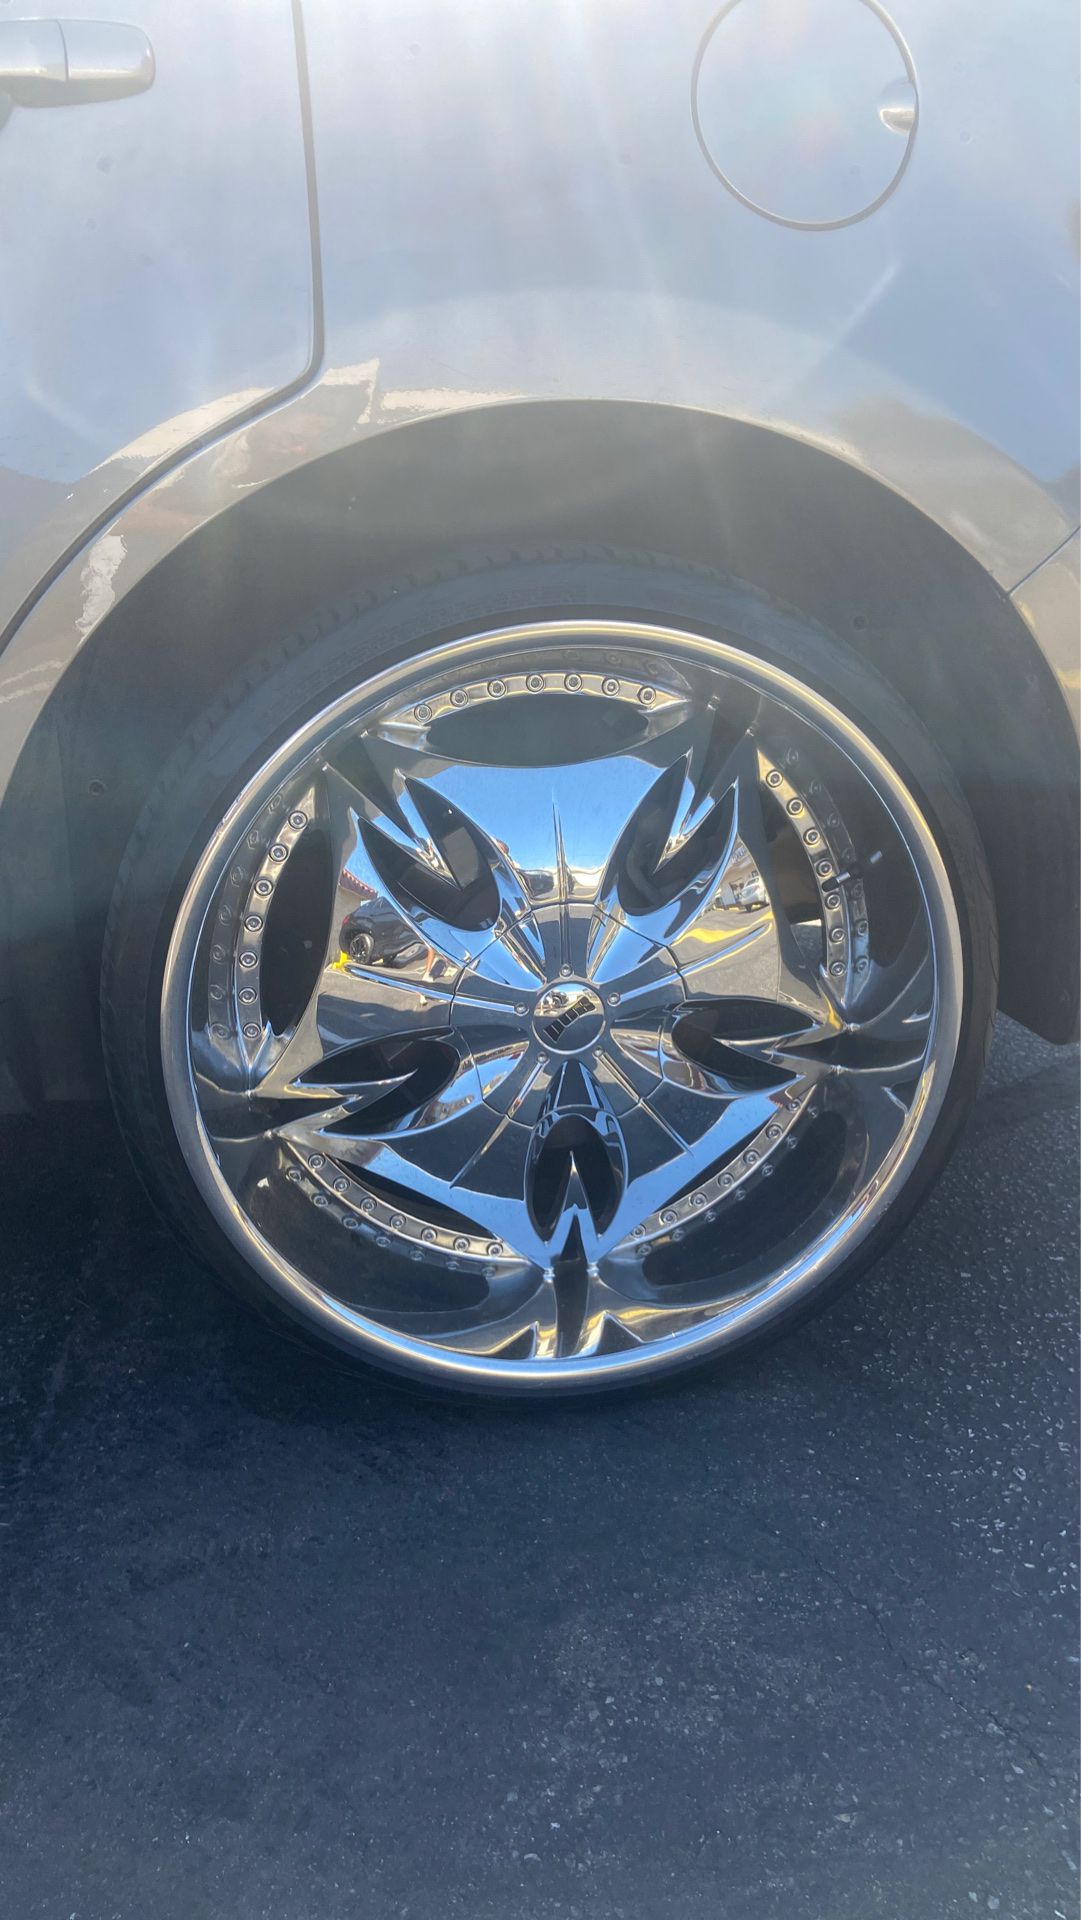 24” rims with tires